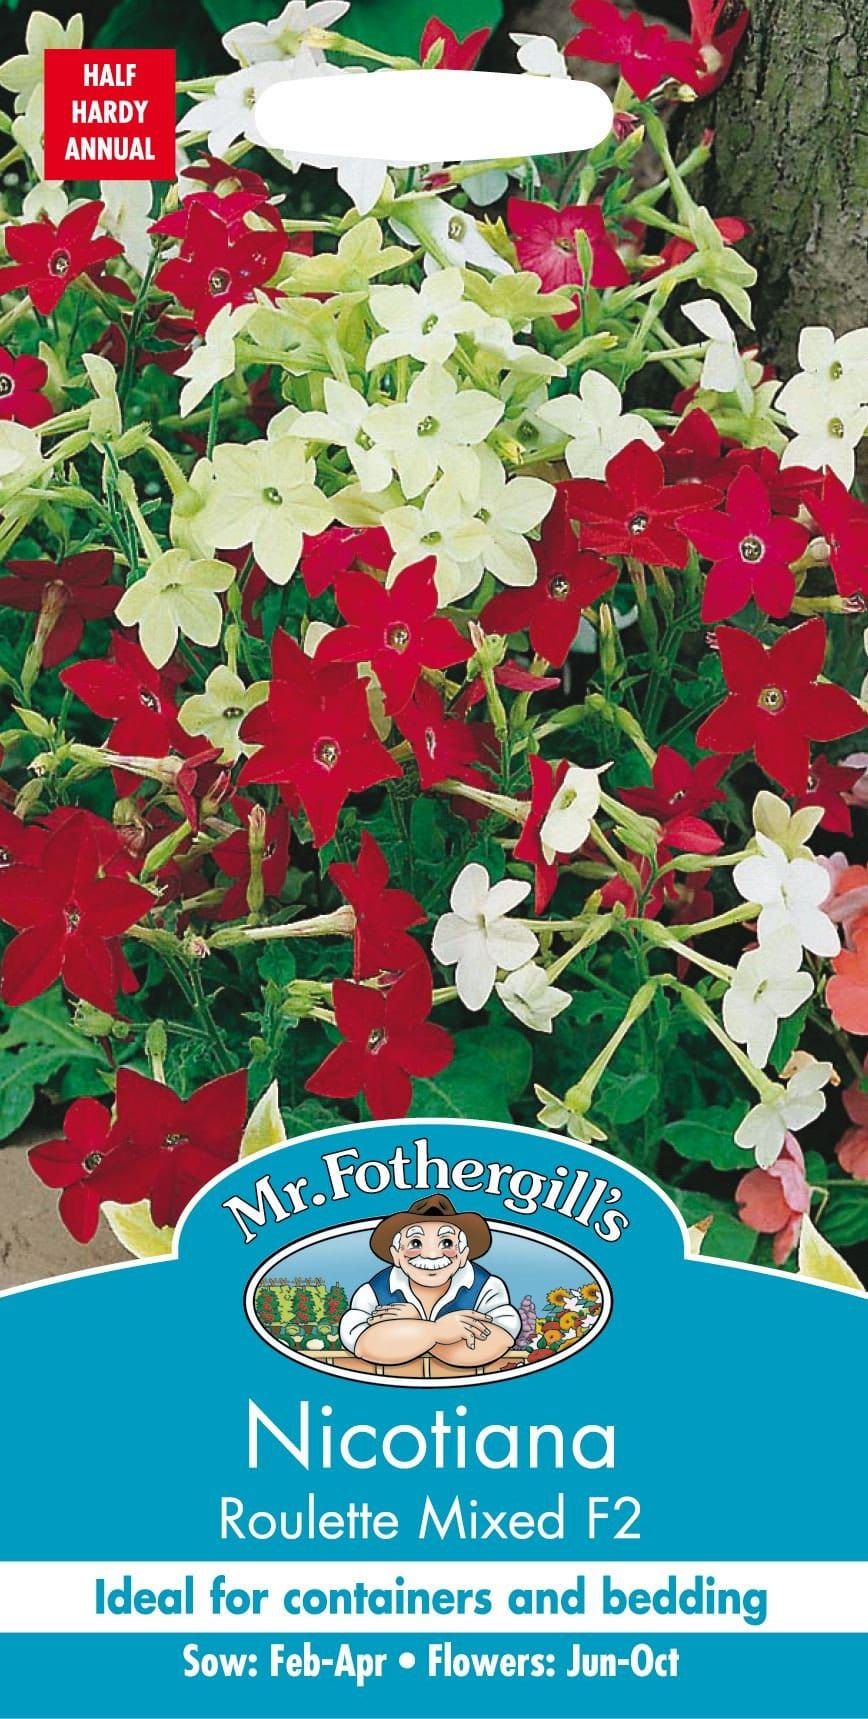 Mr Fothergills Nicotiana Roulette Mixed F2 200 Seeds